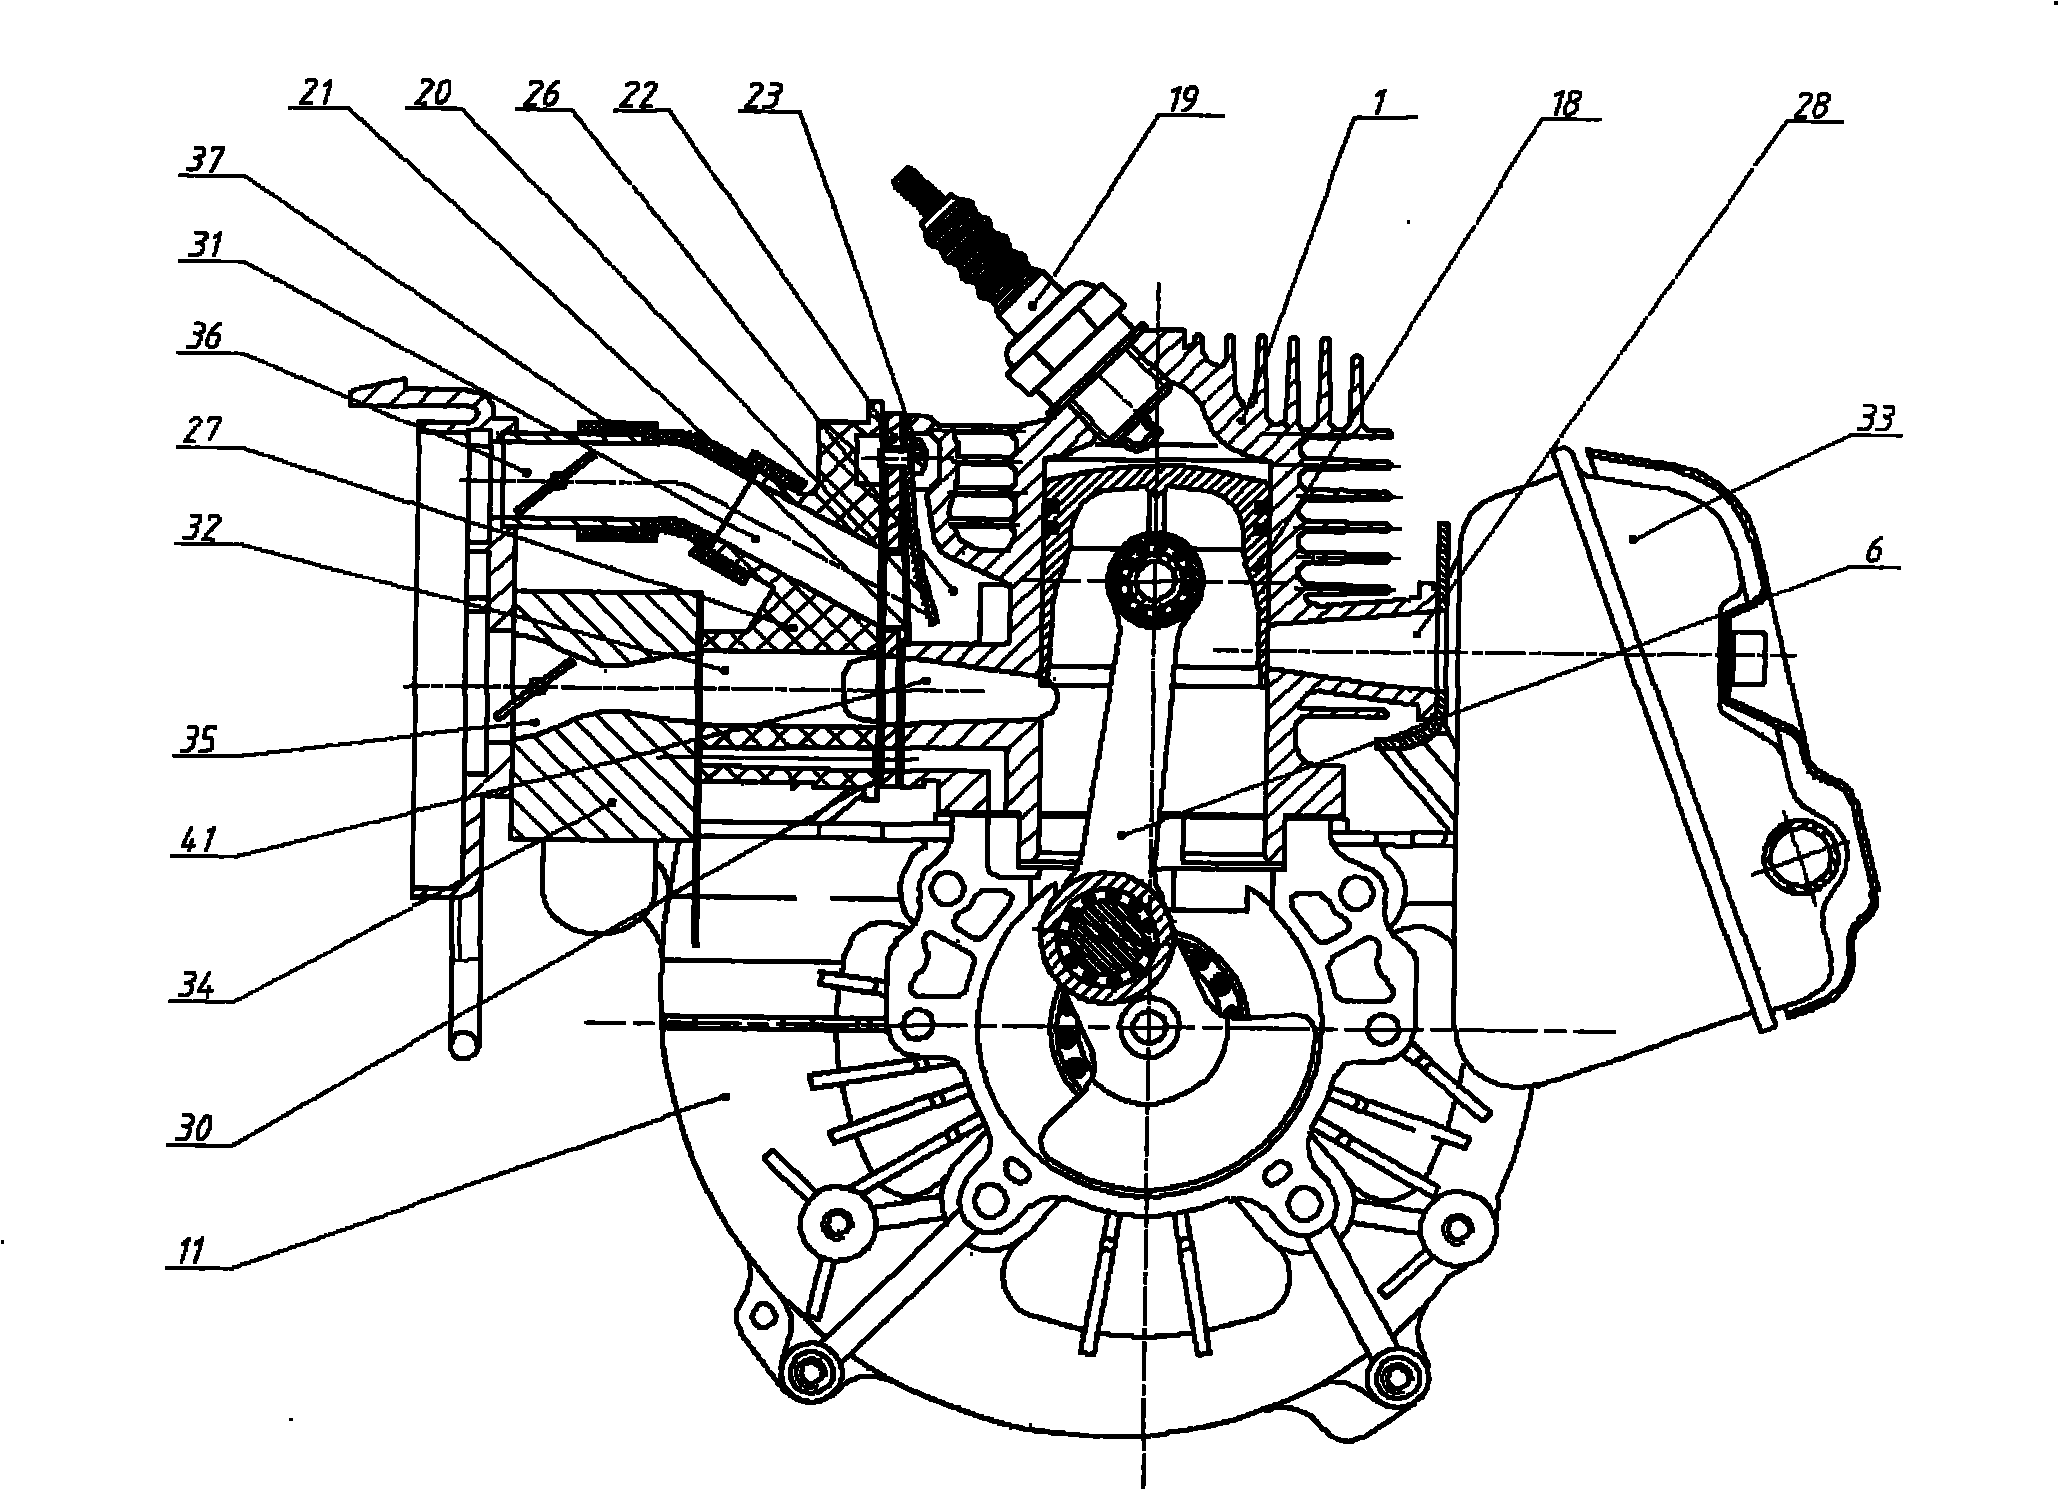 Two-stroke engine capable of scavenging in air pilot mode